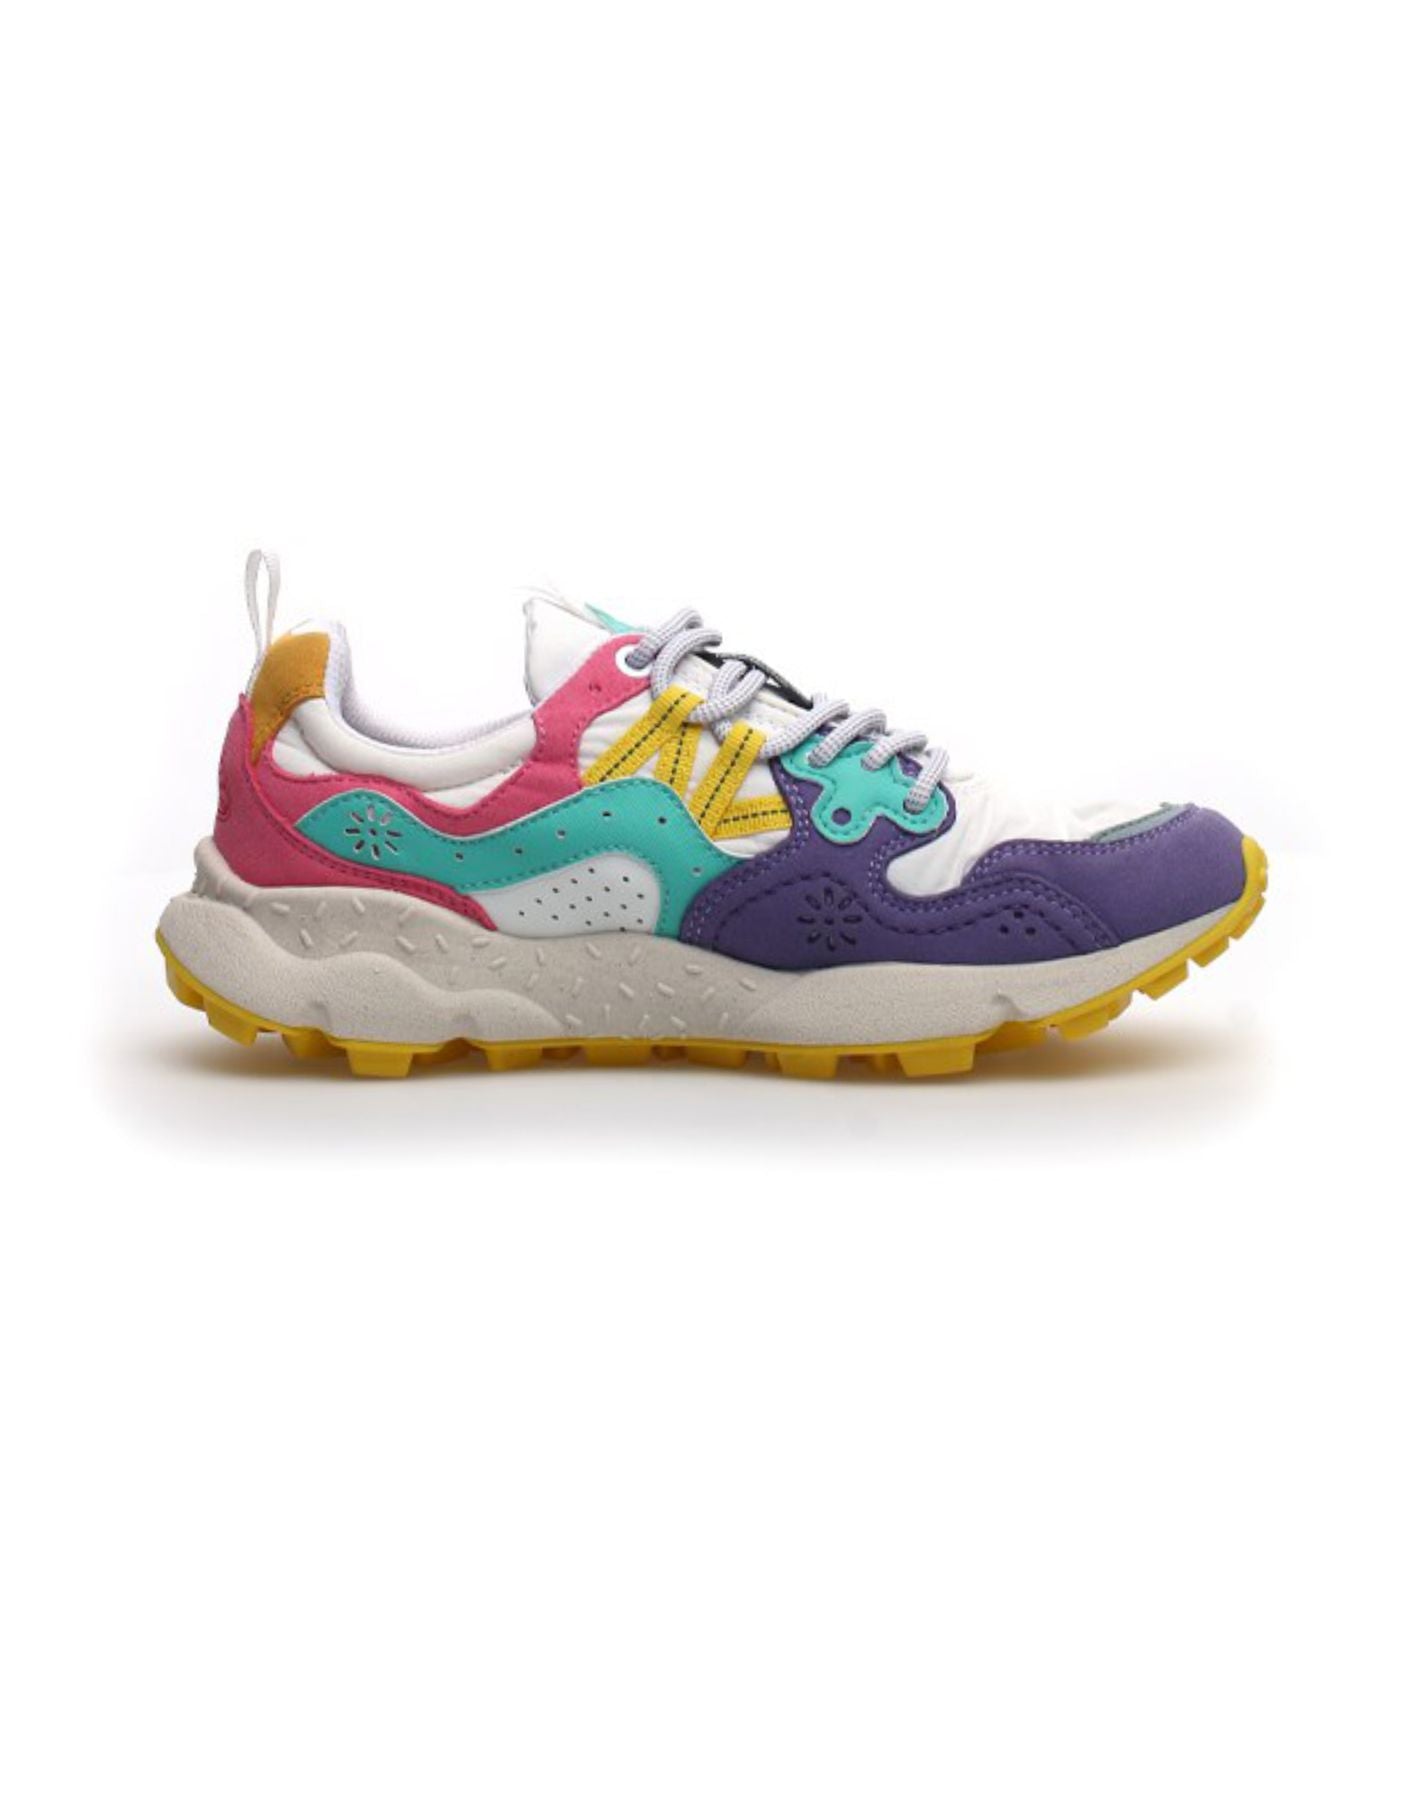 Shoes for woman YAMANO 3 Flower Mountain